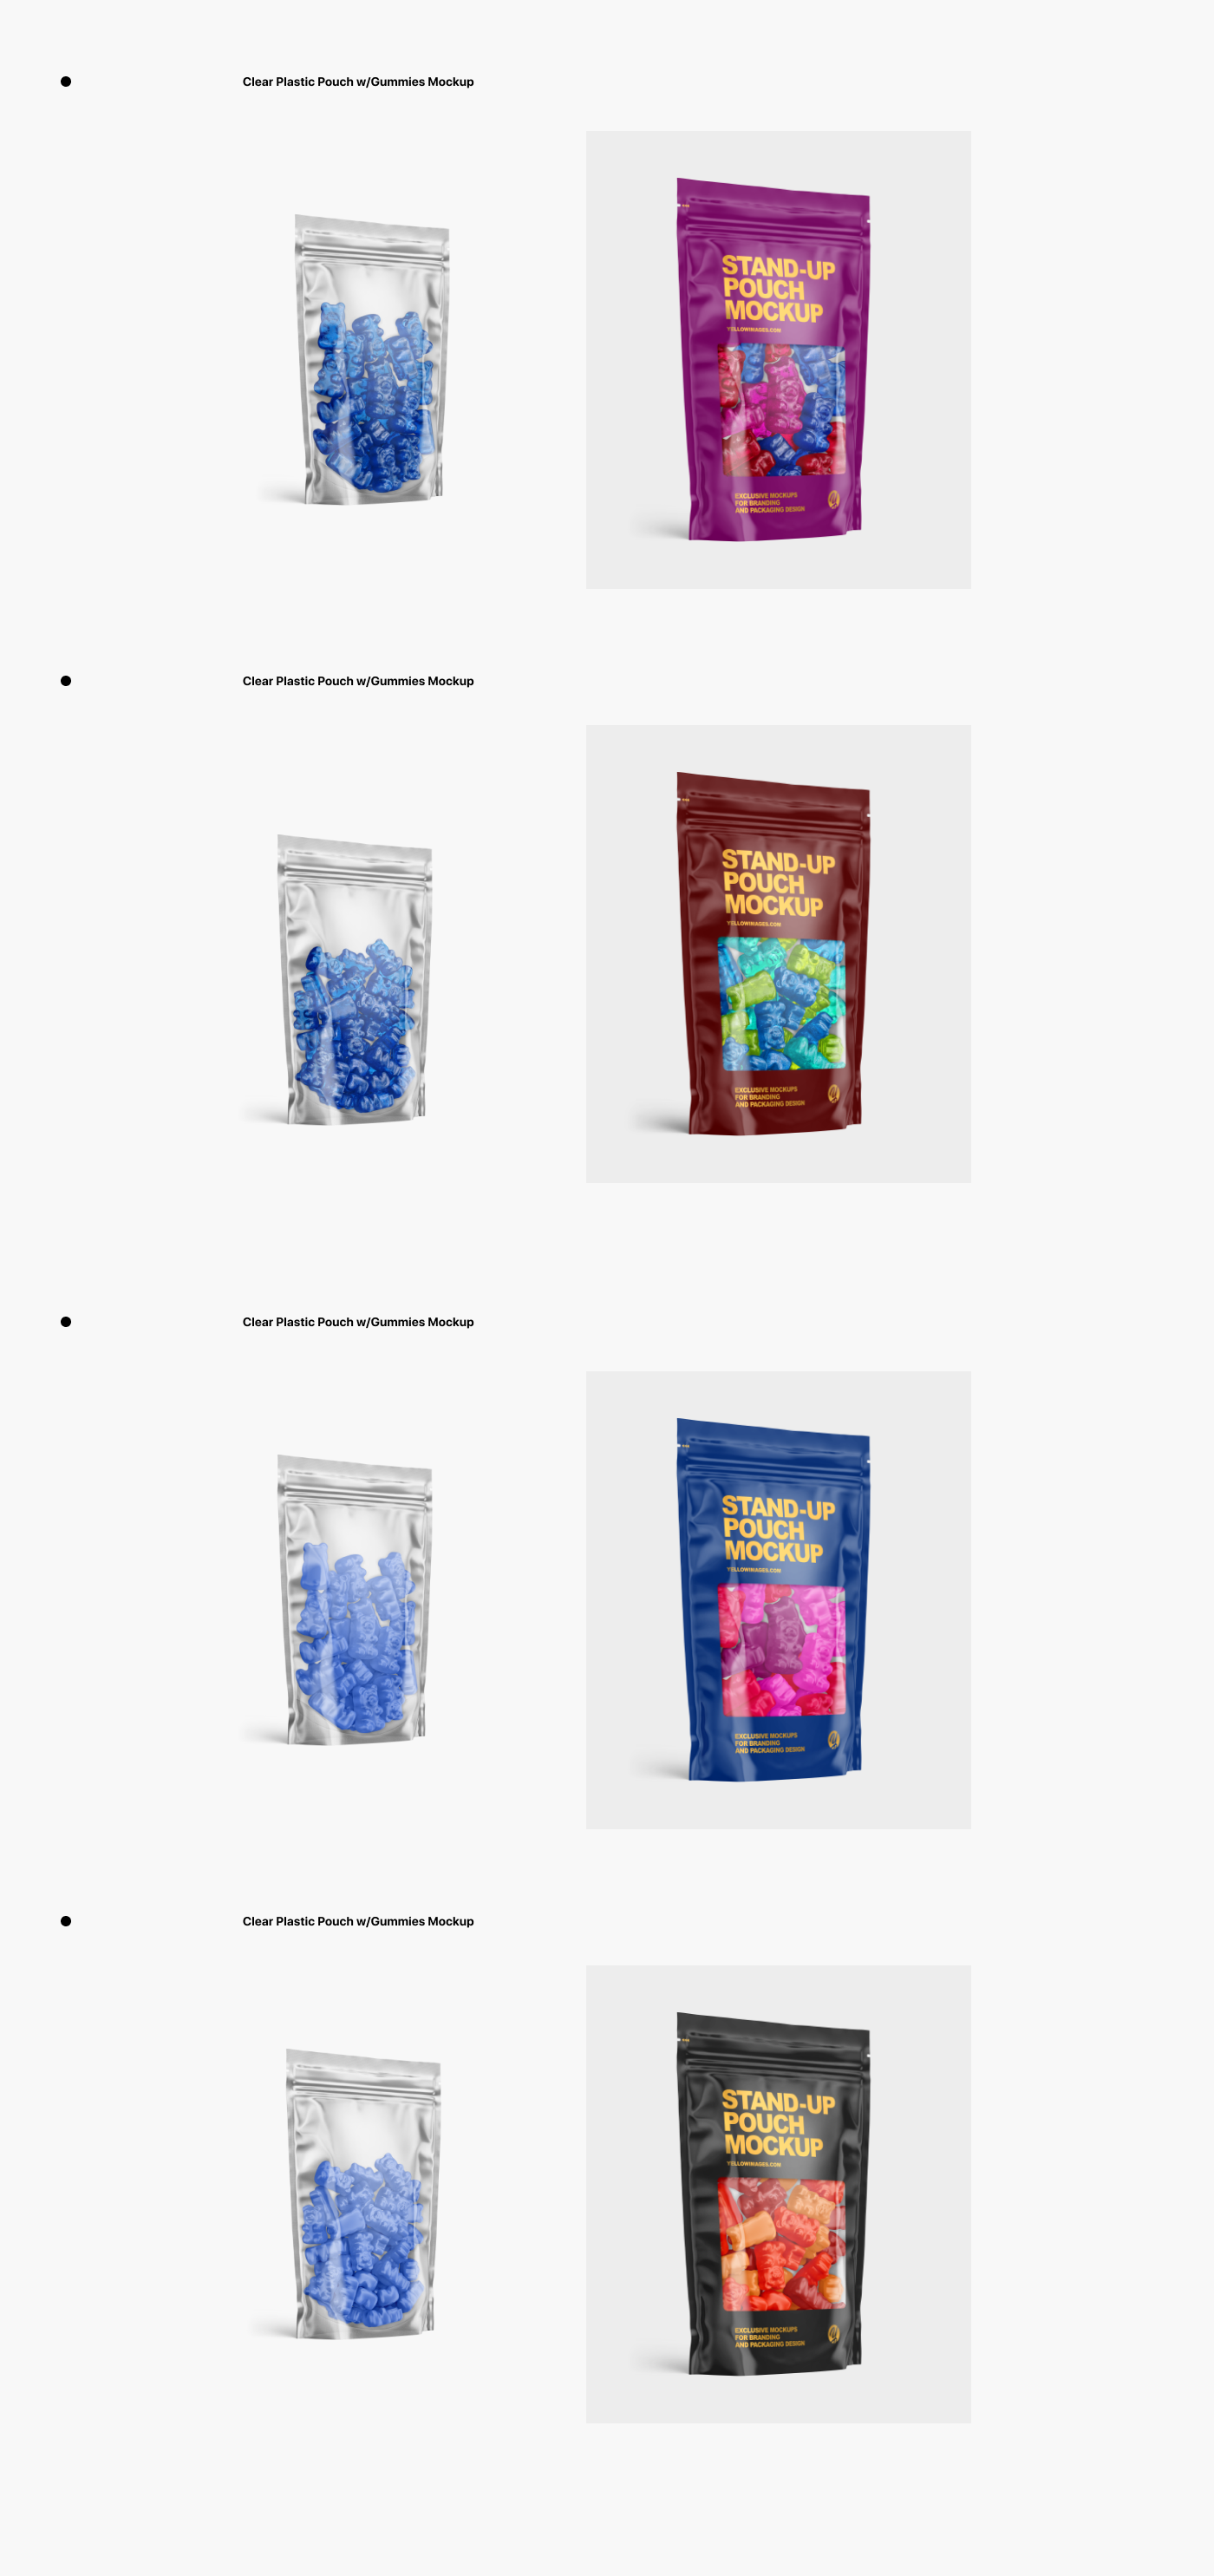 design Labeldesign Mockup Pack package pouch product visualization free mockup  Pouch Mockup